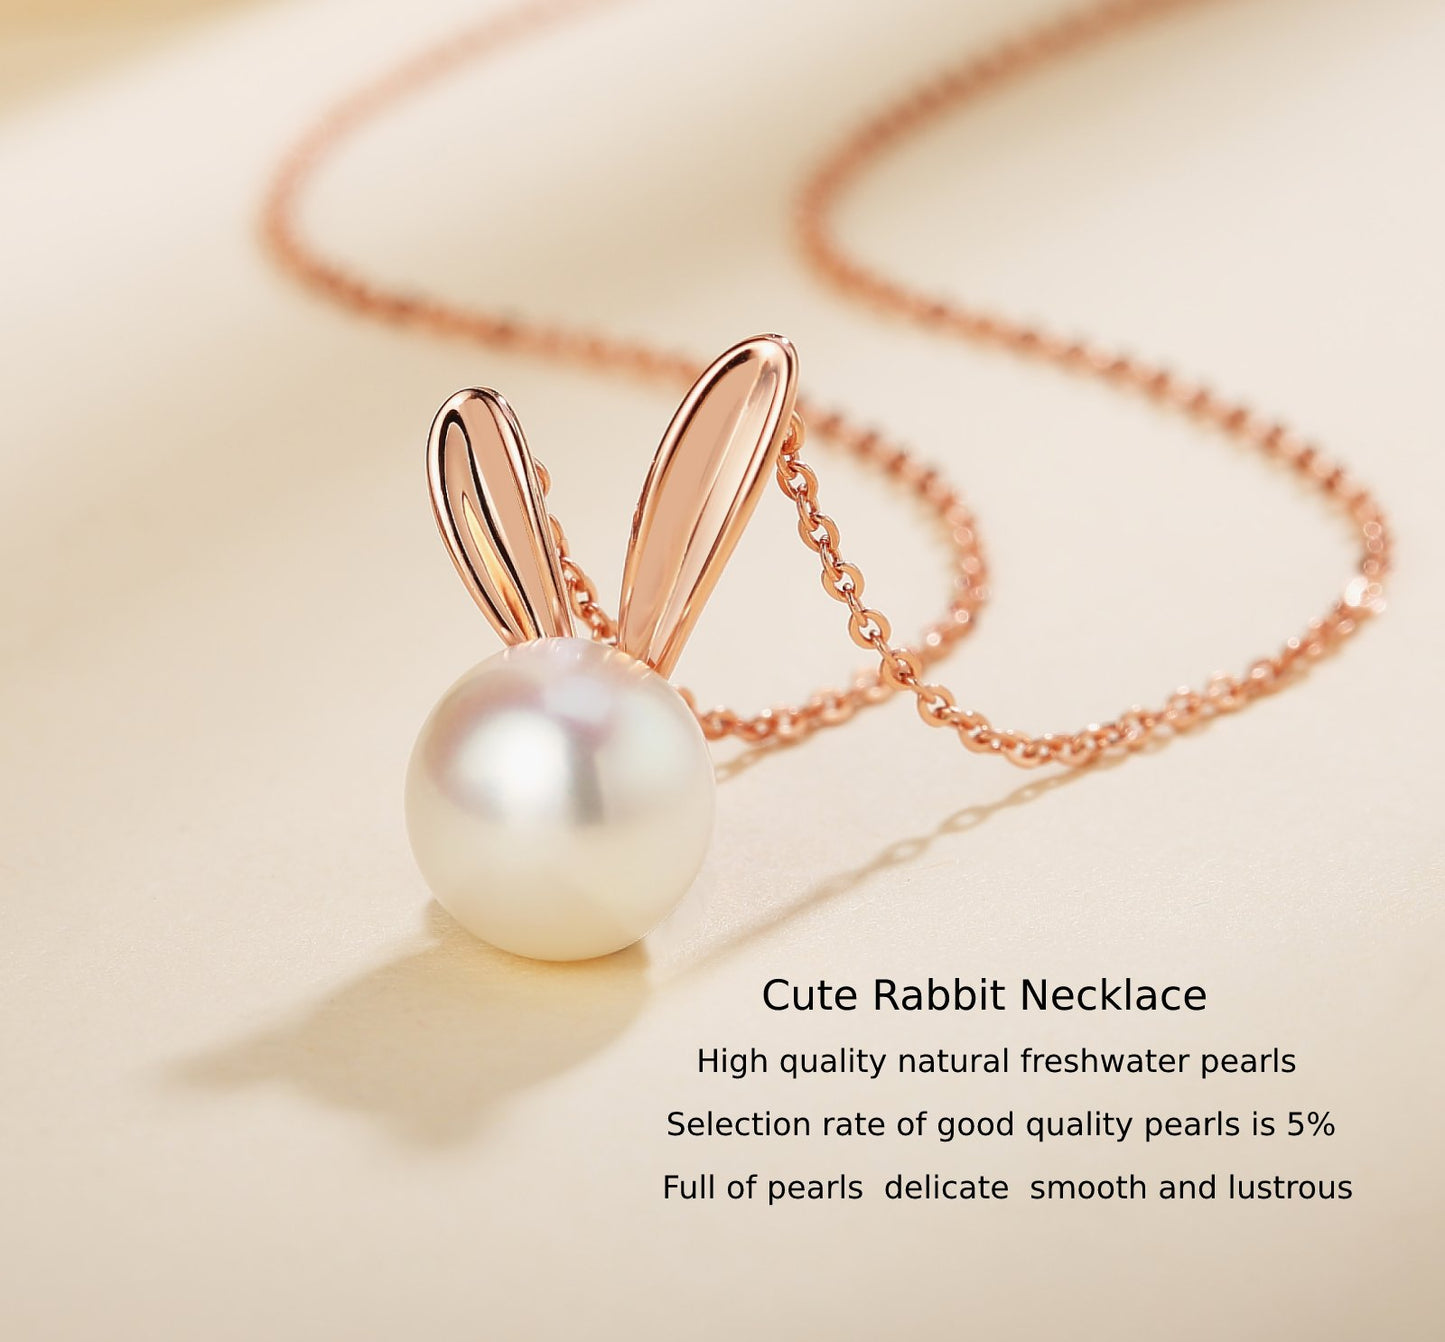 Cute Rabbit Necklace with Natural Pearls (8-9mm) in Sterling Silver (Rose)